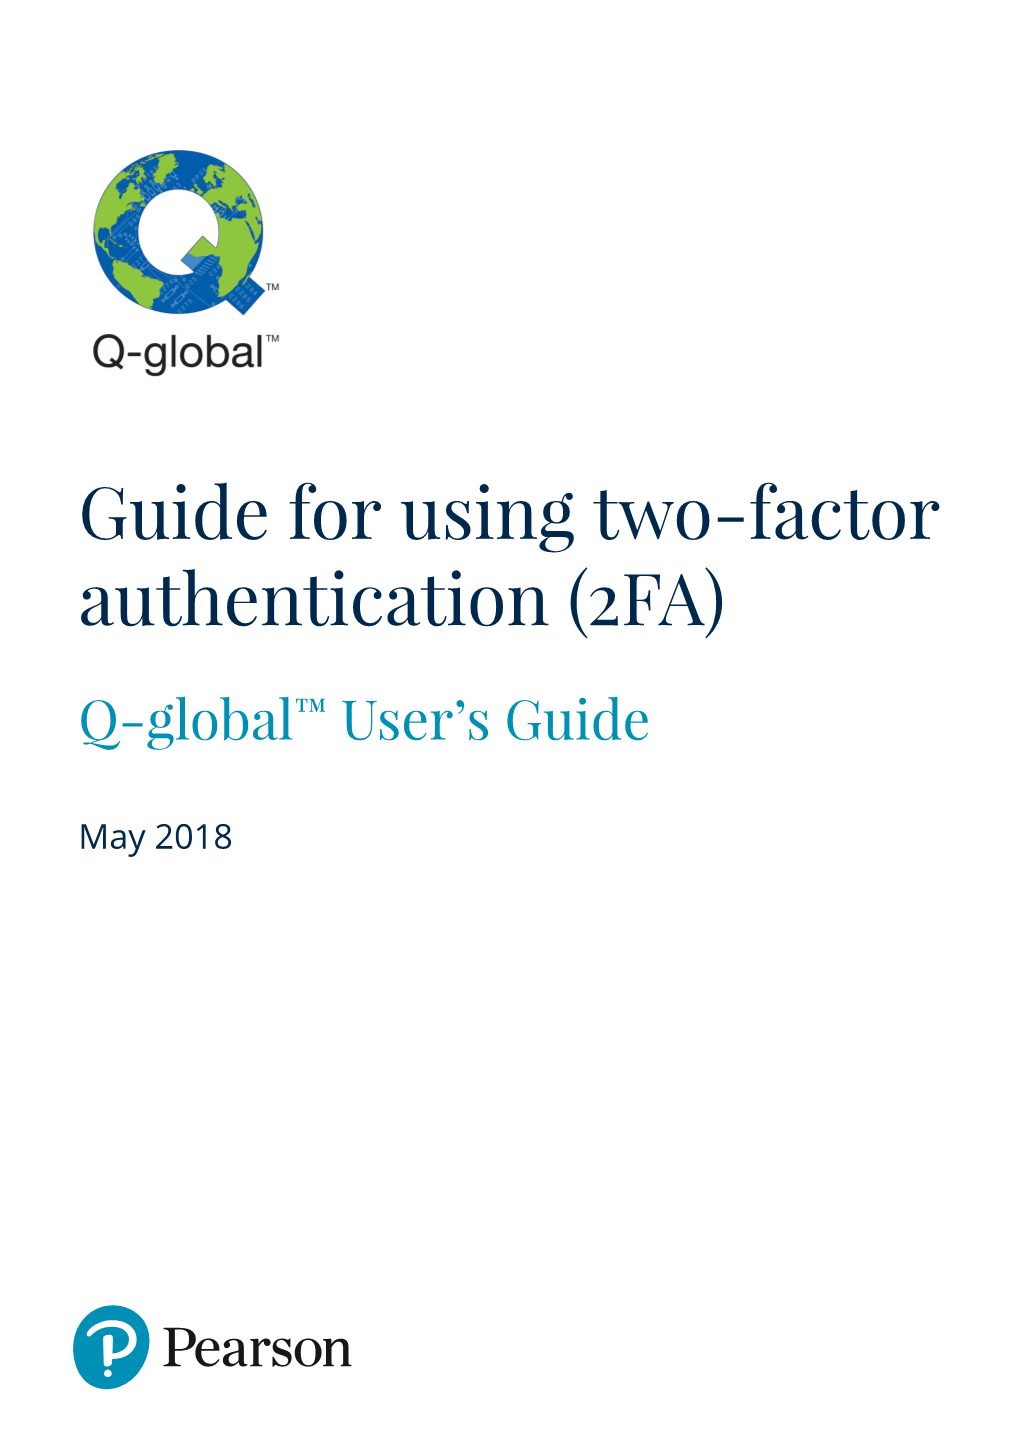 Qg Guide for Using Two-Factor Authentication (2FA)